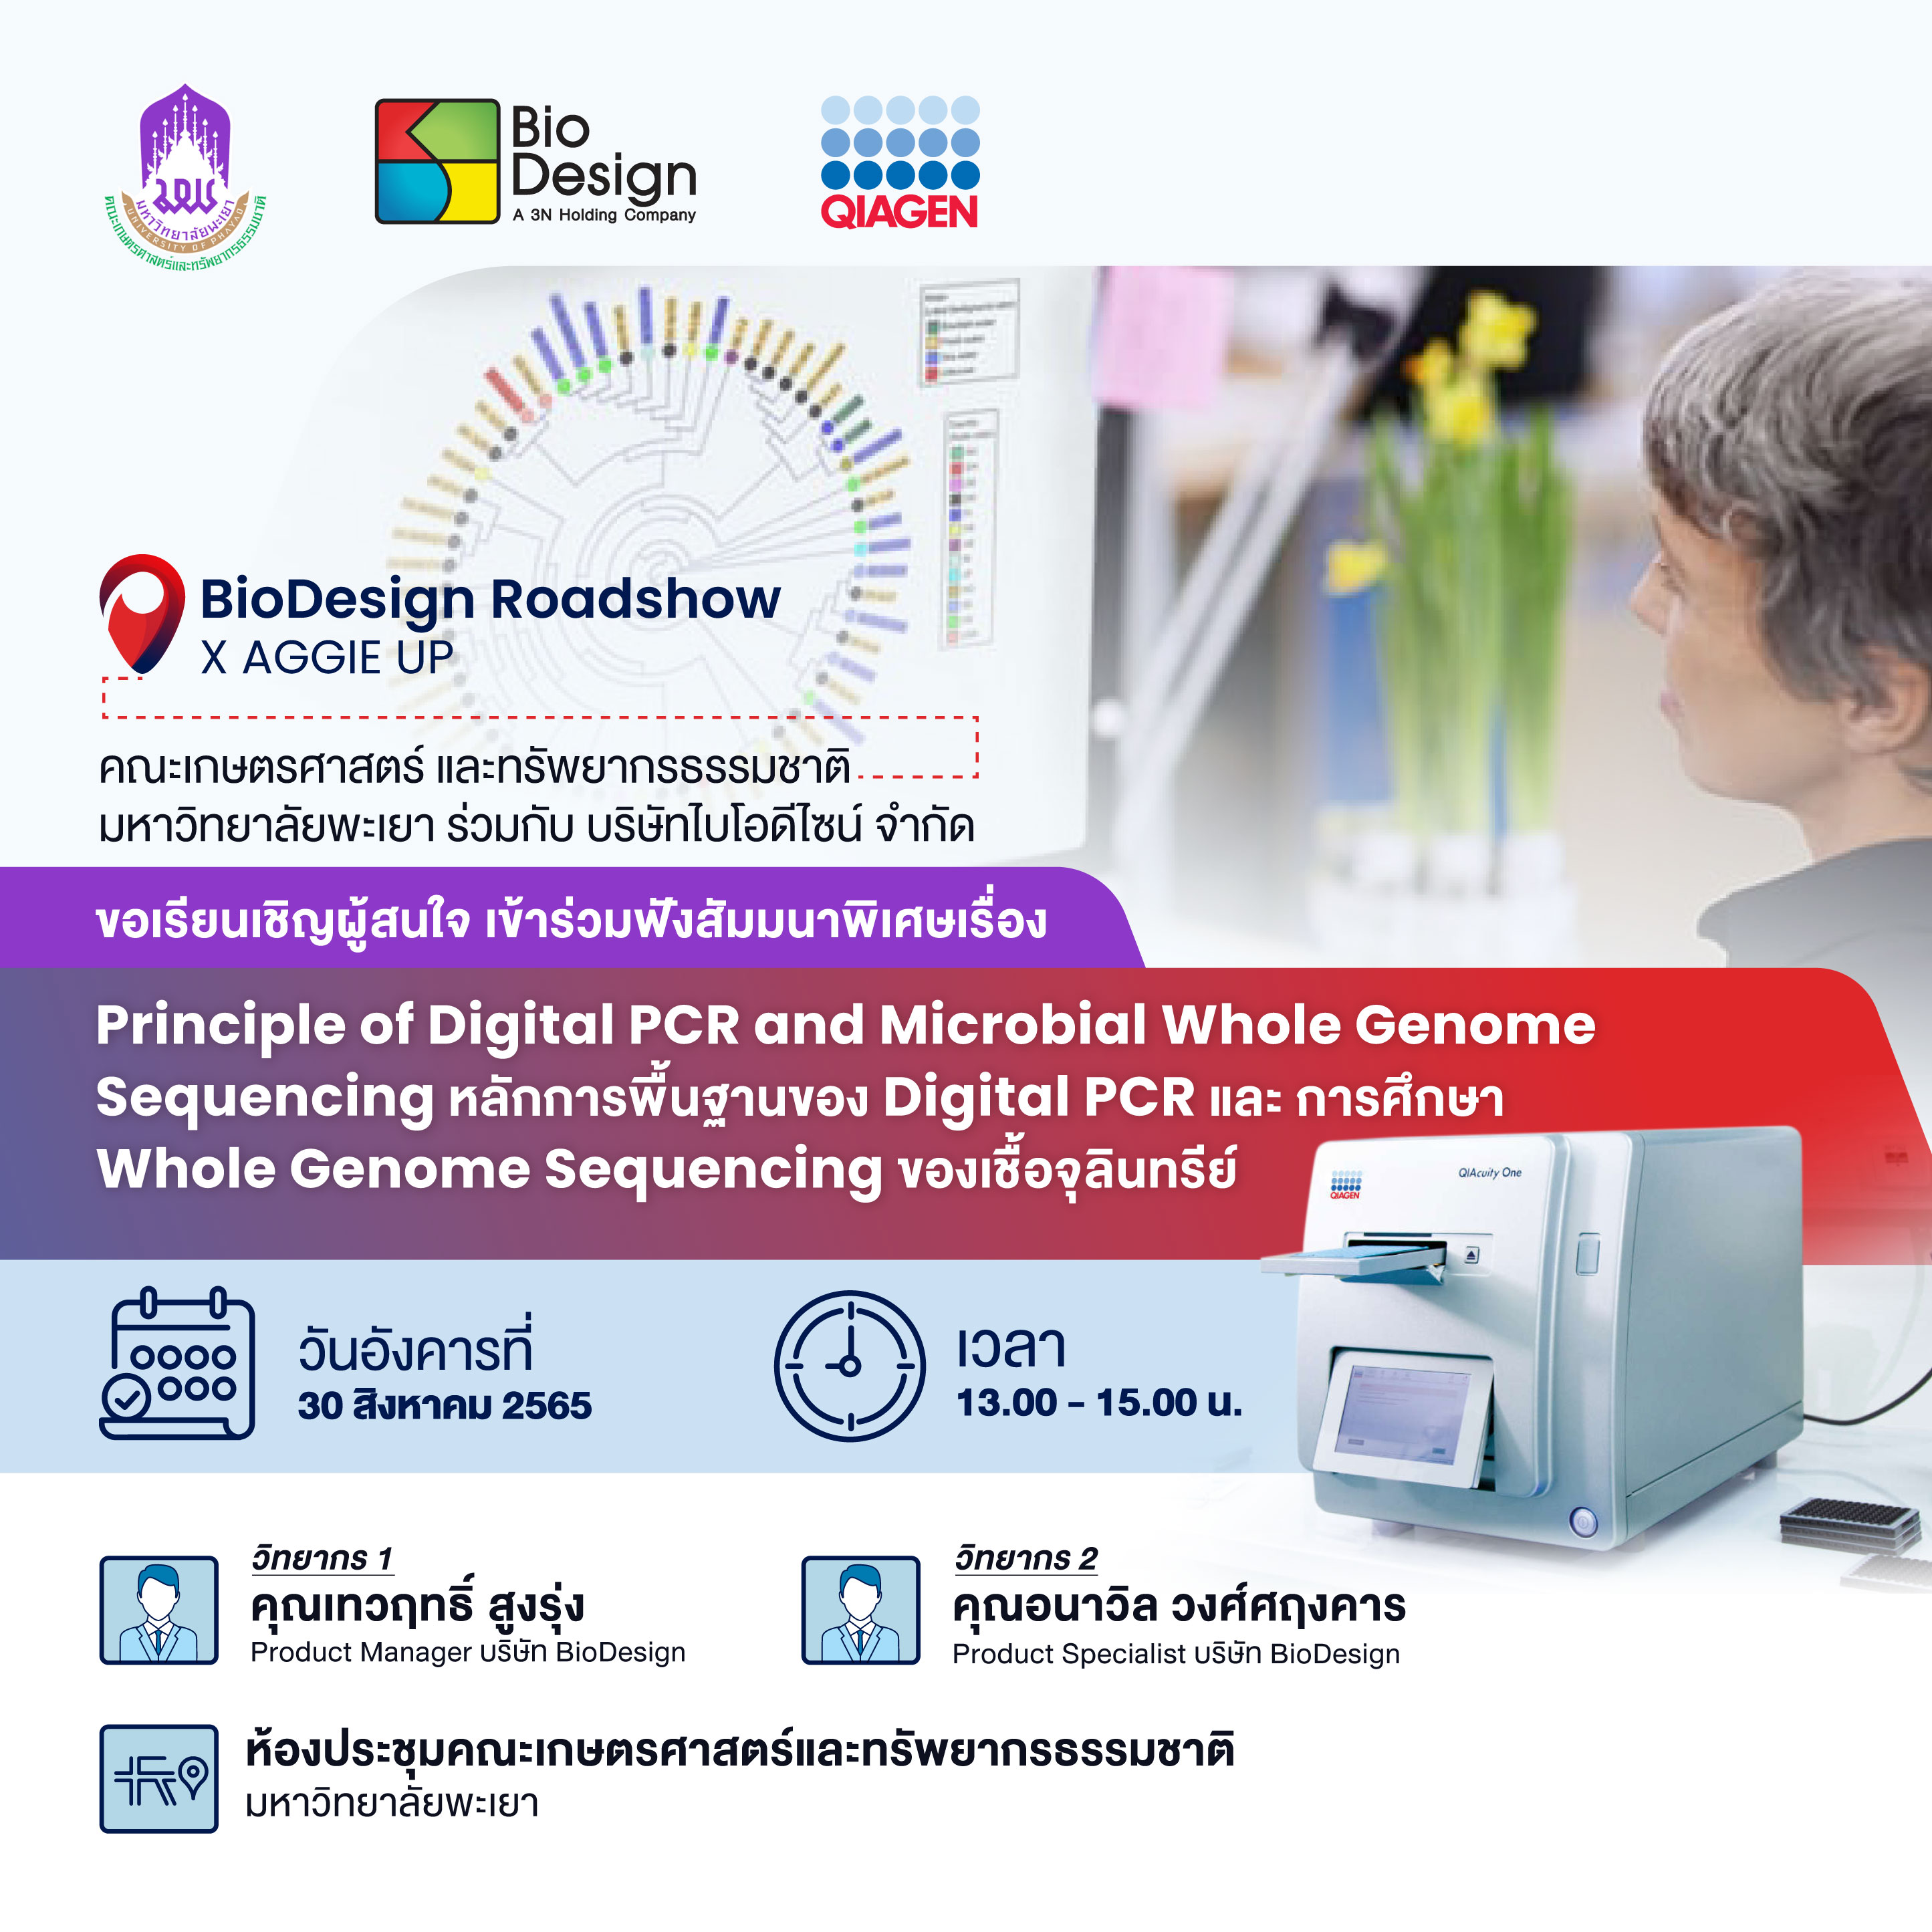 Principle of Digital PCR and Microbial Whole Genome Sequencing